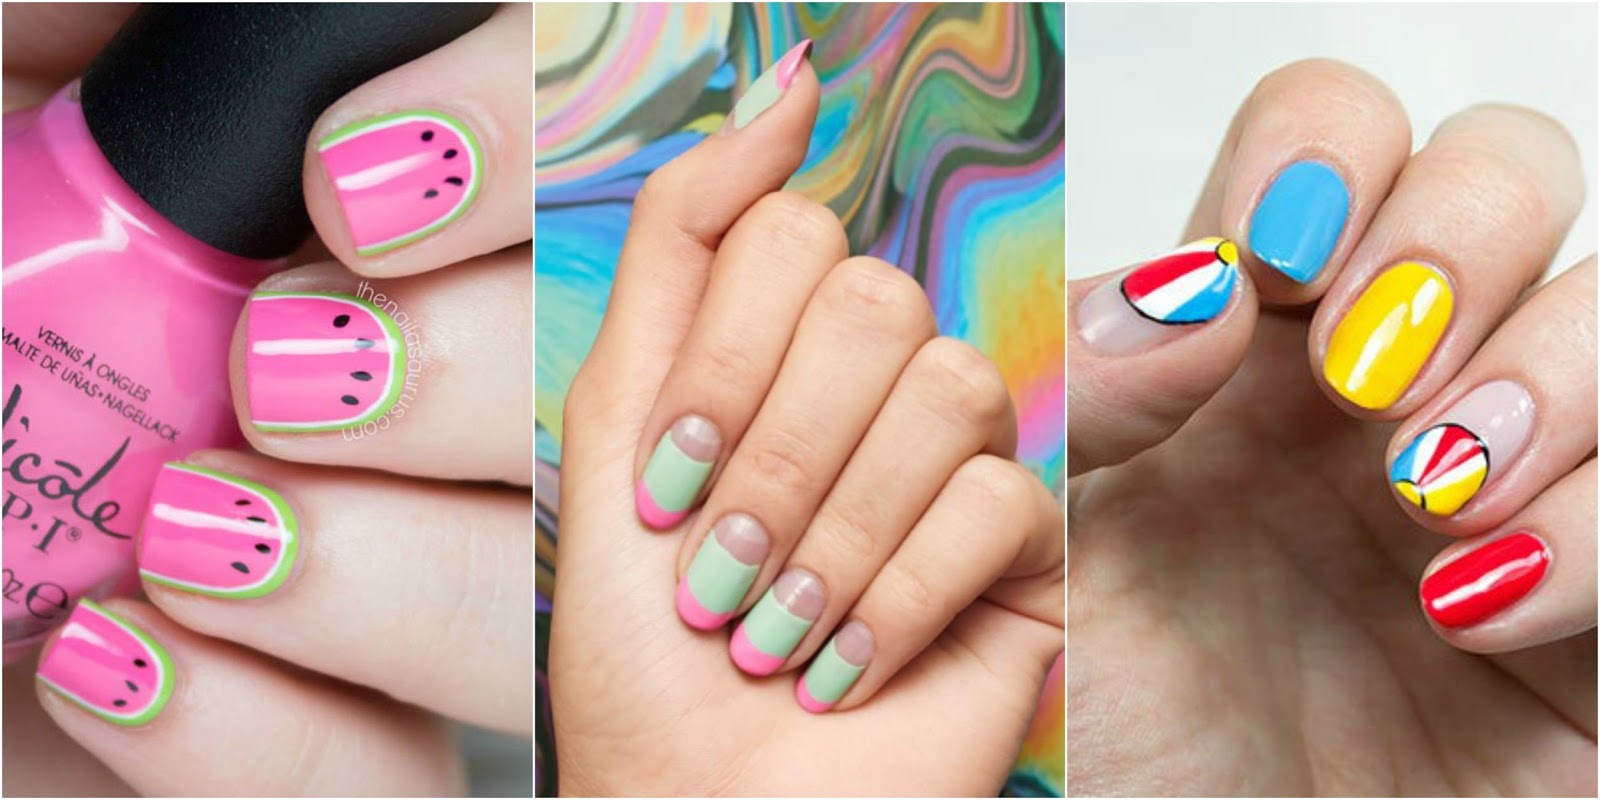 8. Affordable options for one nail art - wide 3